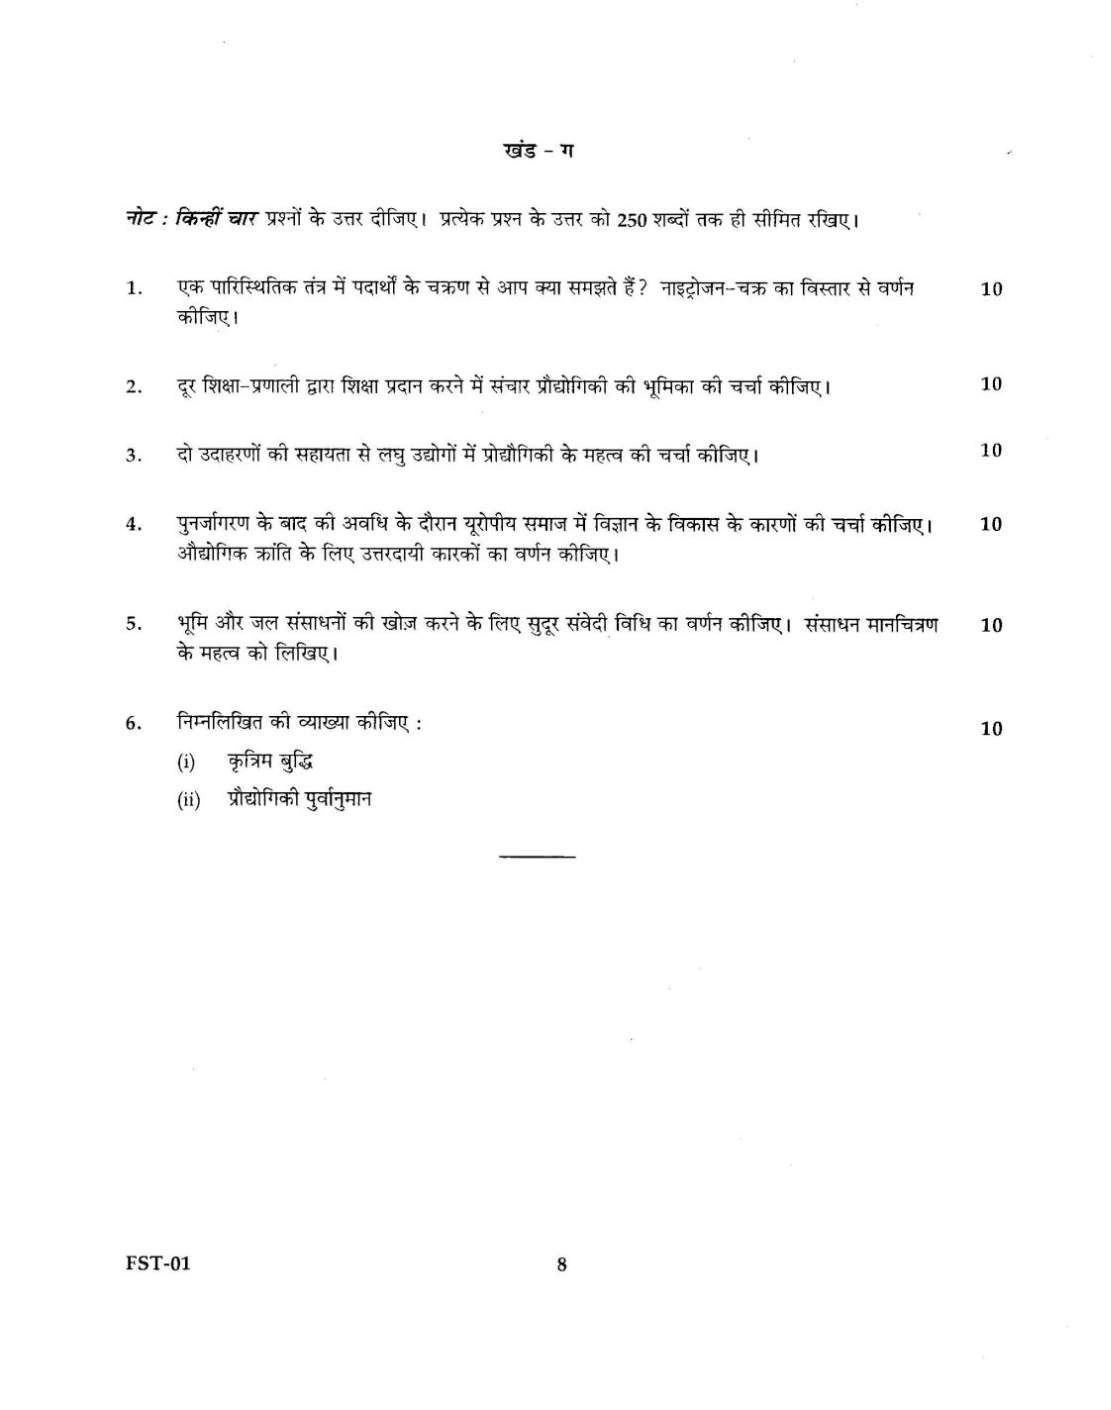 Buy research papers online cheap eco11 sample exam paper 1